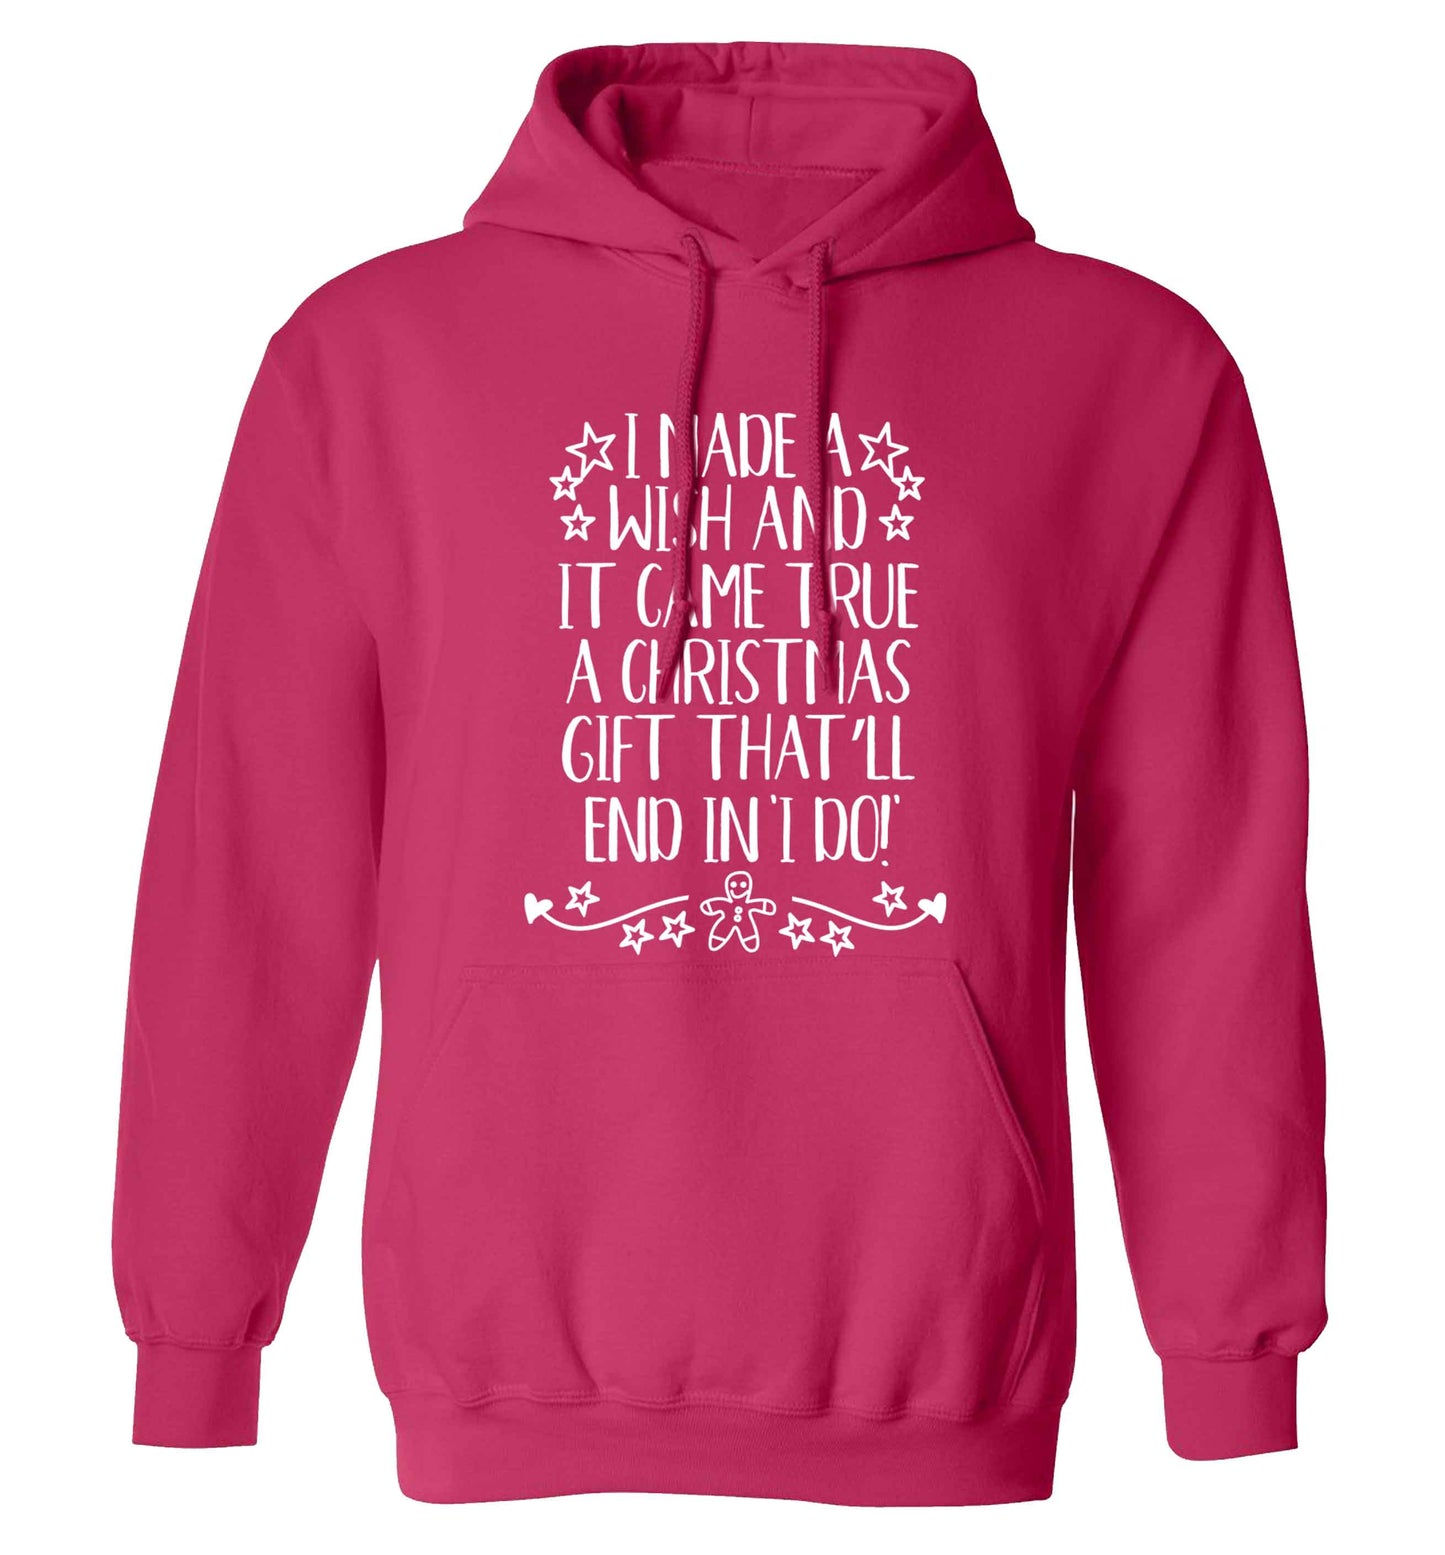 I made a wish and it came true a Christmas gift that'll end in 'I do' adults unisex pink hoodie 2XL